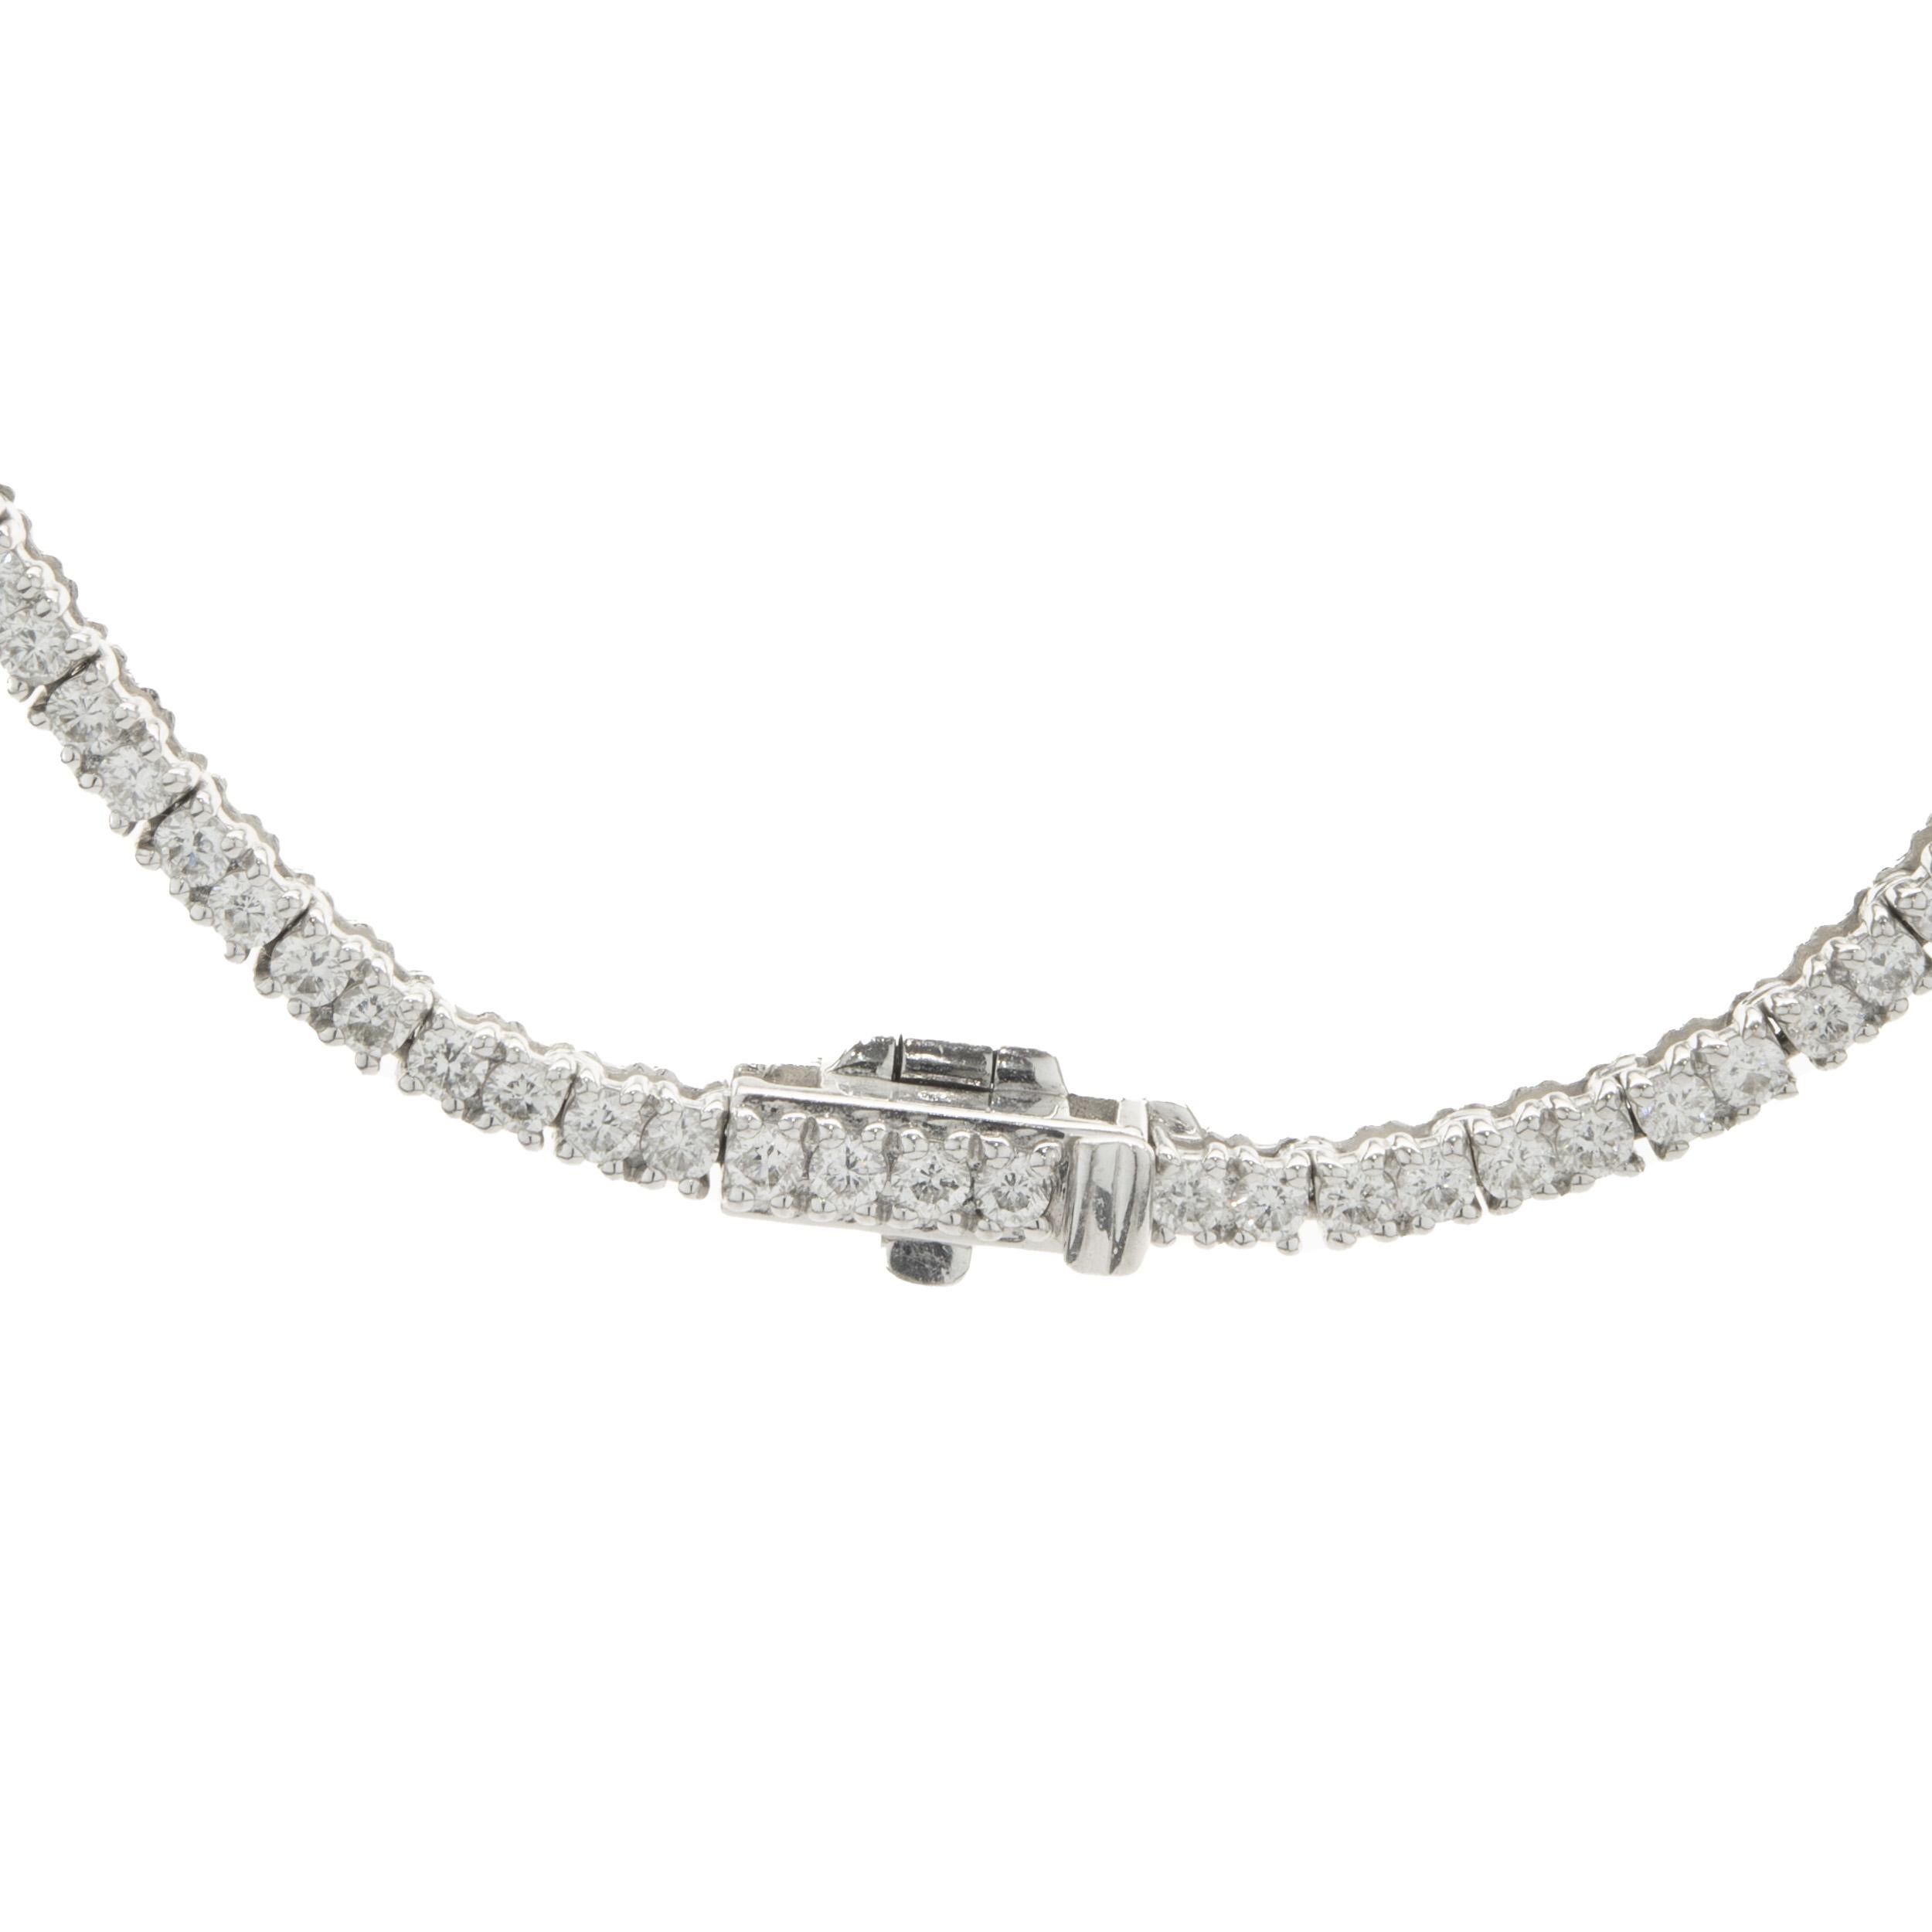 14 Karat White Gold Diamond Tennis Necklace with Rose Cut Diamond Stations In Excellent Condition For Sale In Scottsdale, AZ